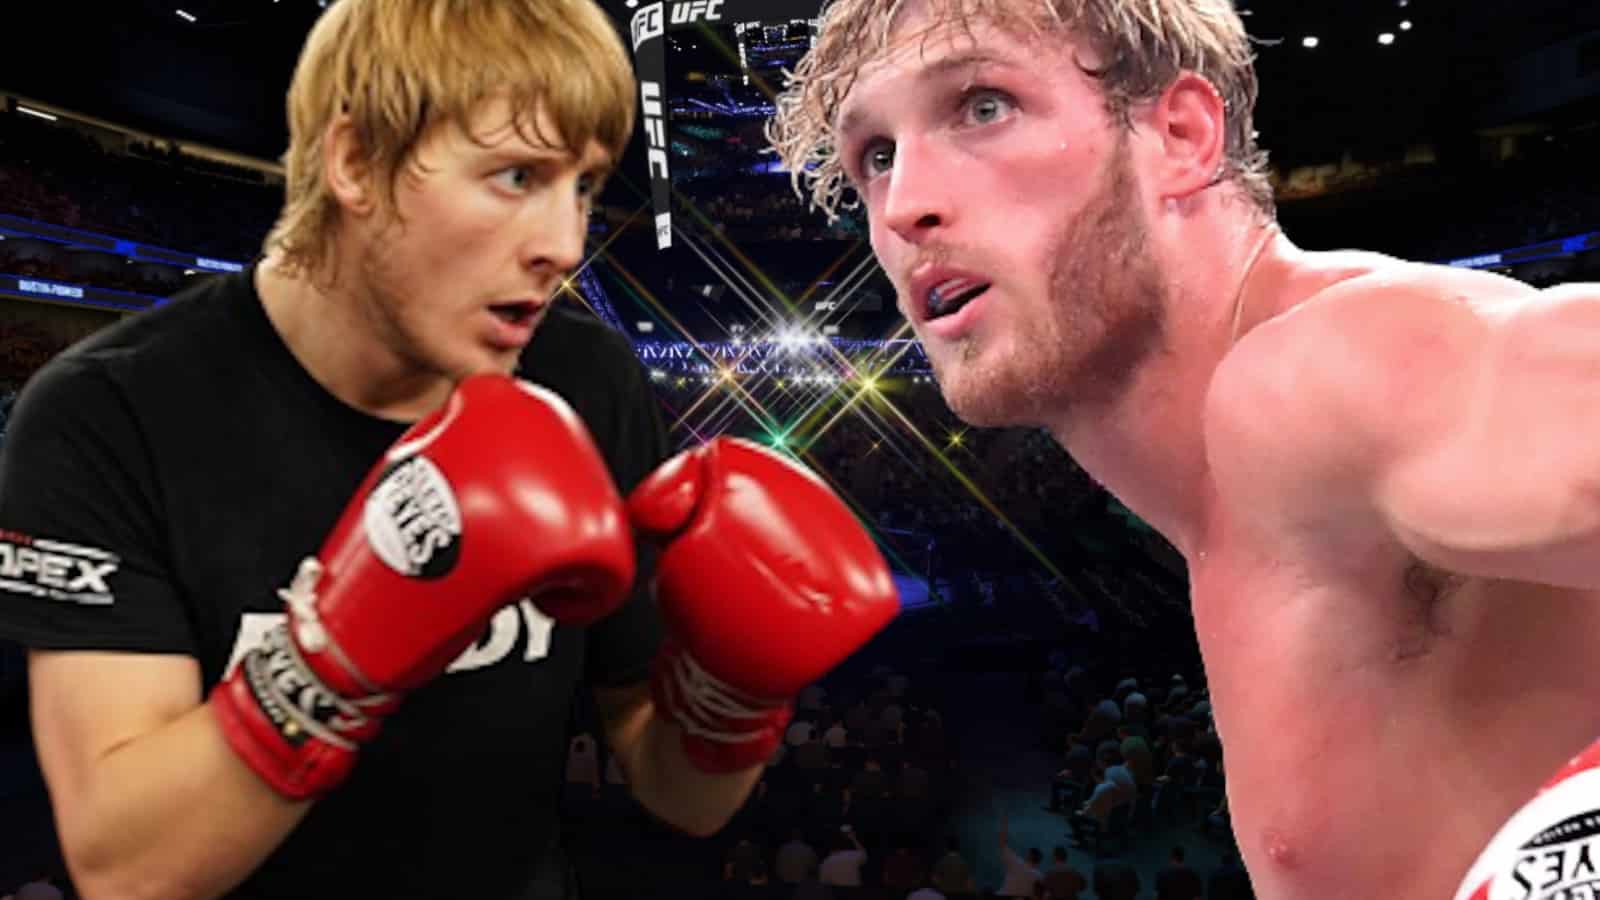 Logan Paul challenges Paddy the baddy to UFC fight